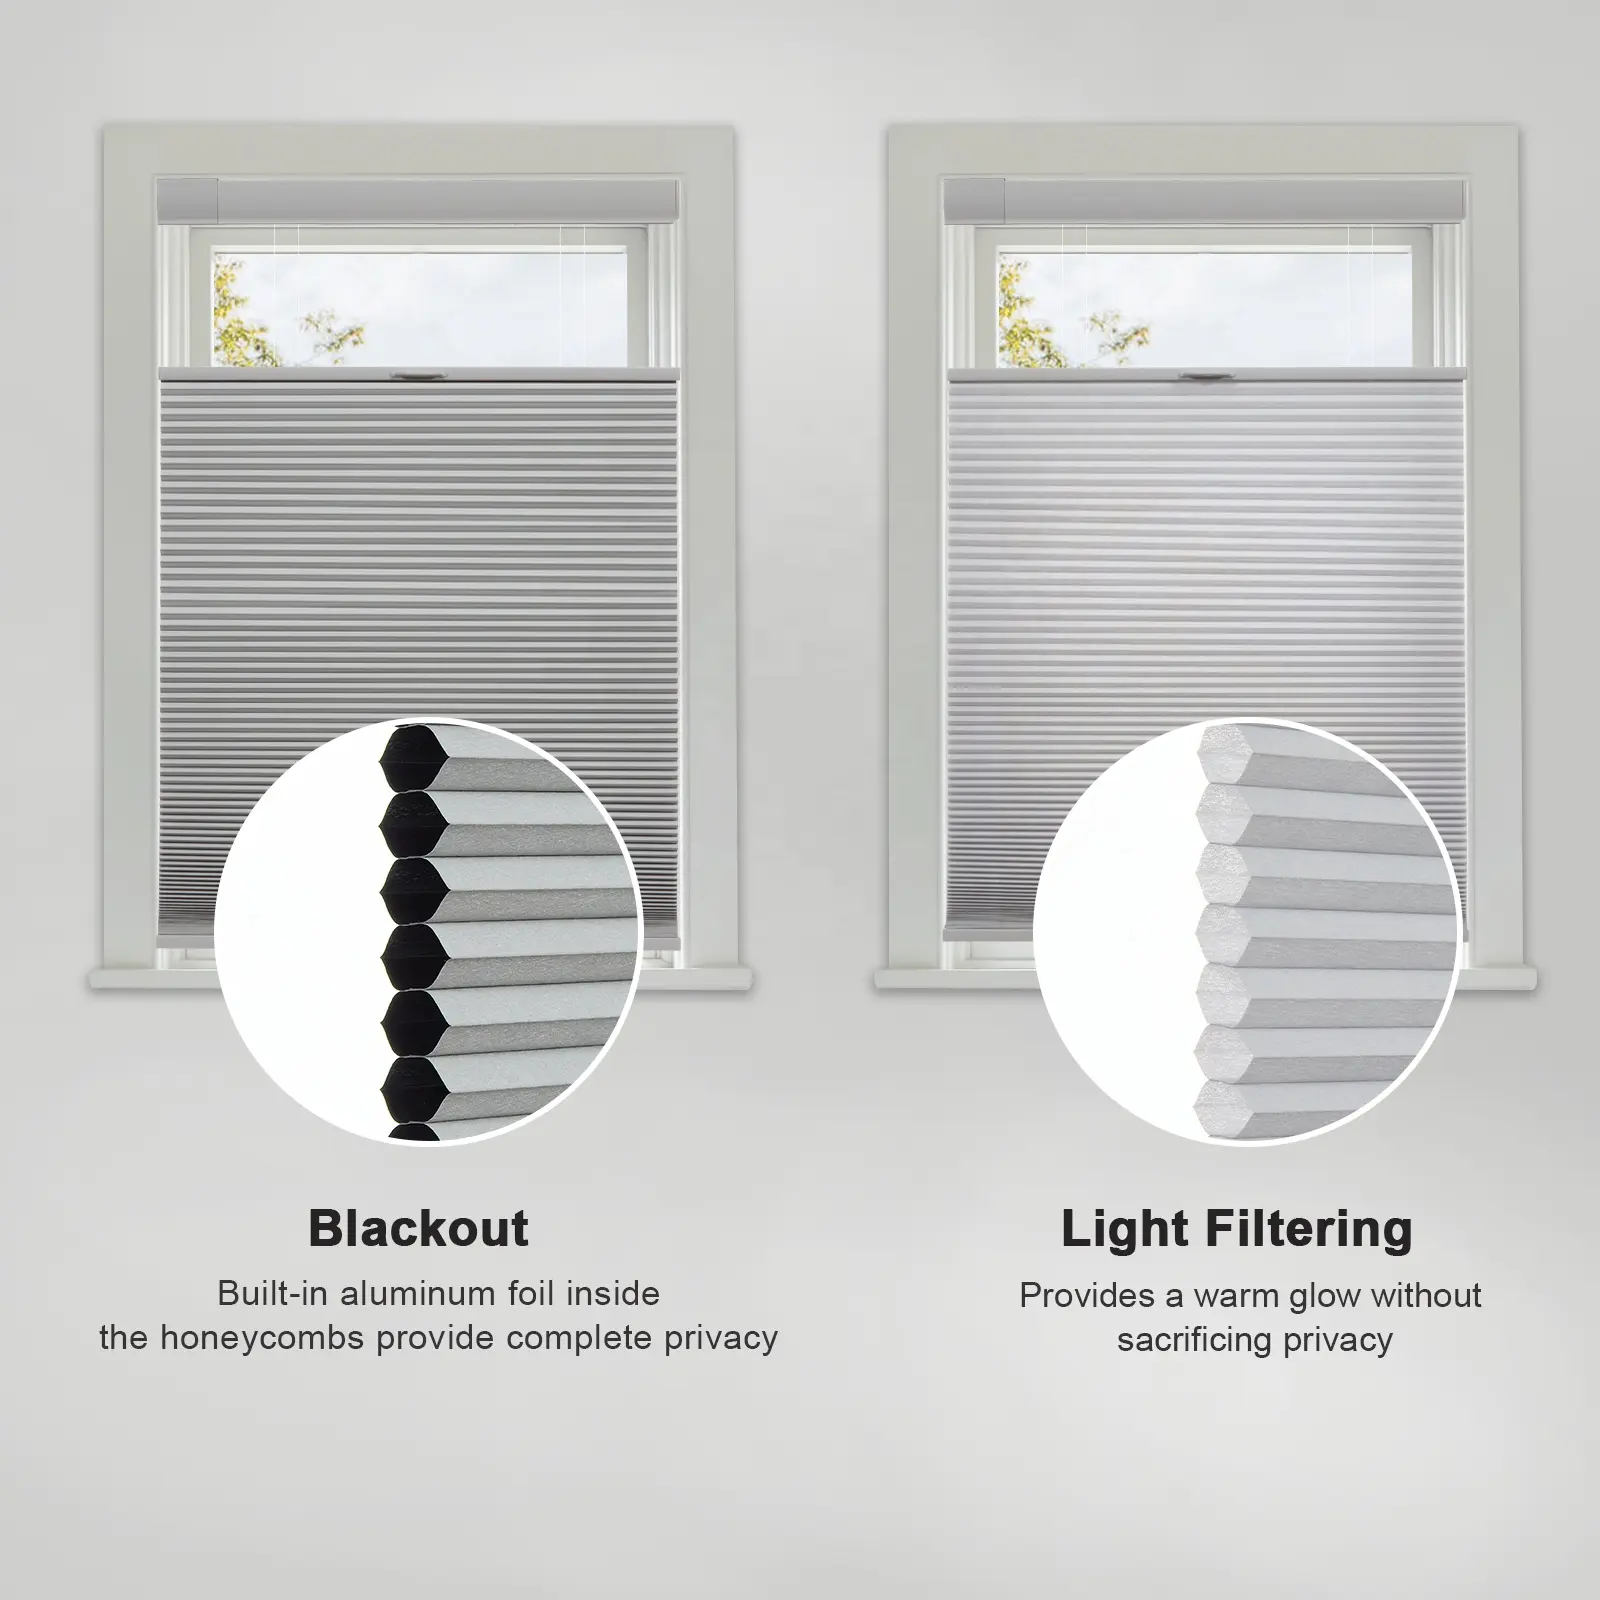 Custom Honeycomb Blinds Cellular Shades 100% Blackout Cellular Shades With Tension Mechanism